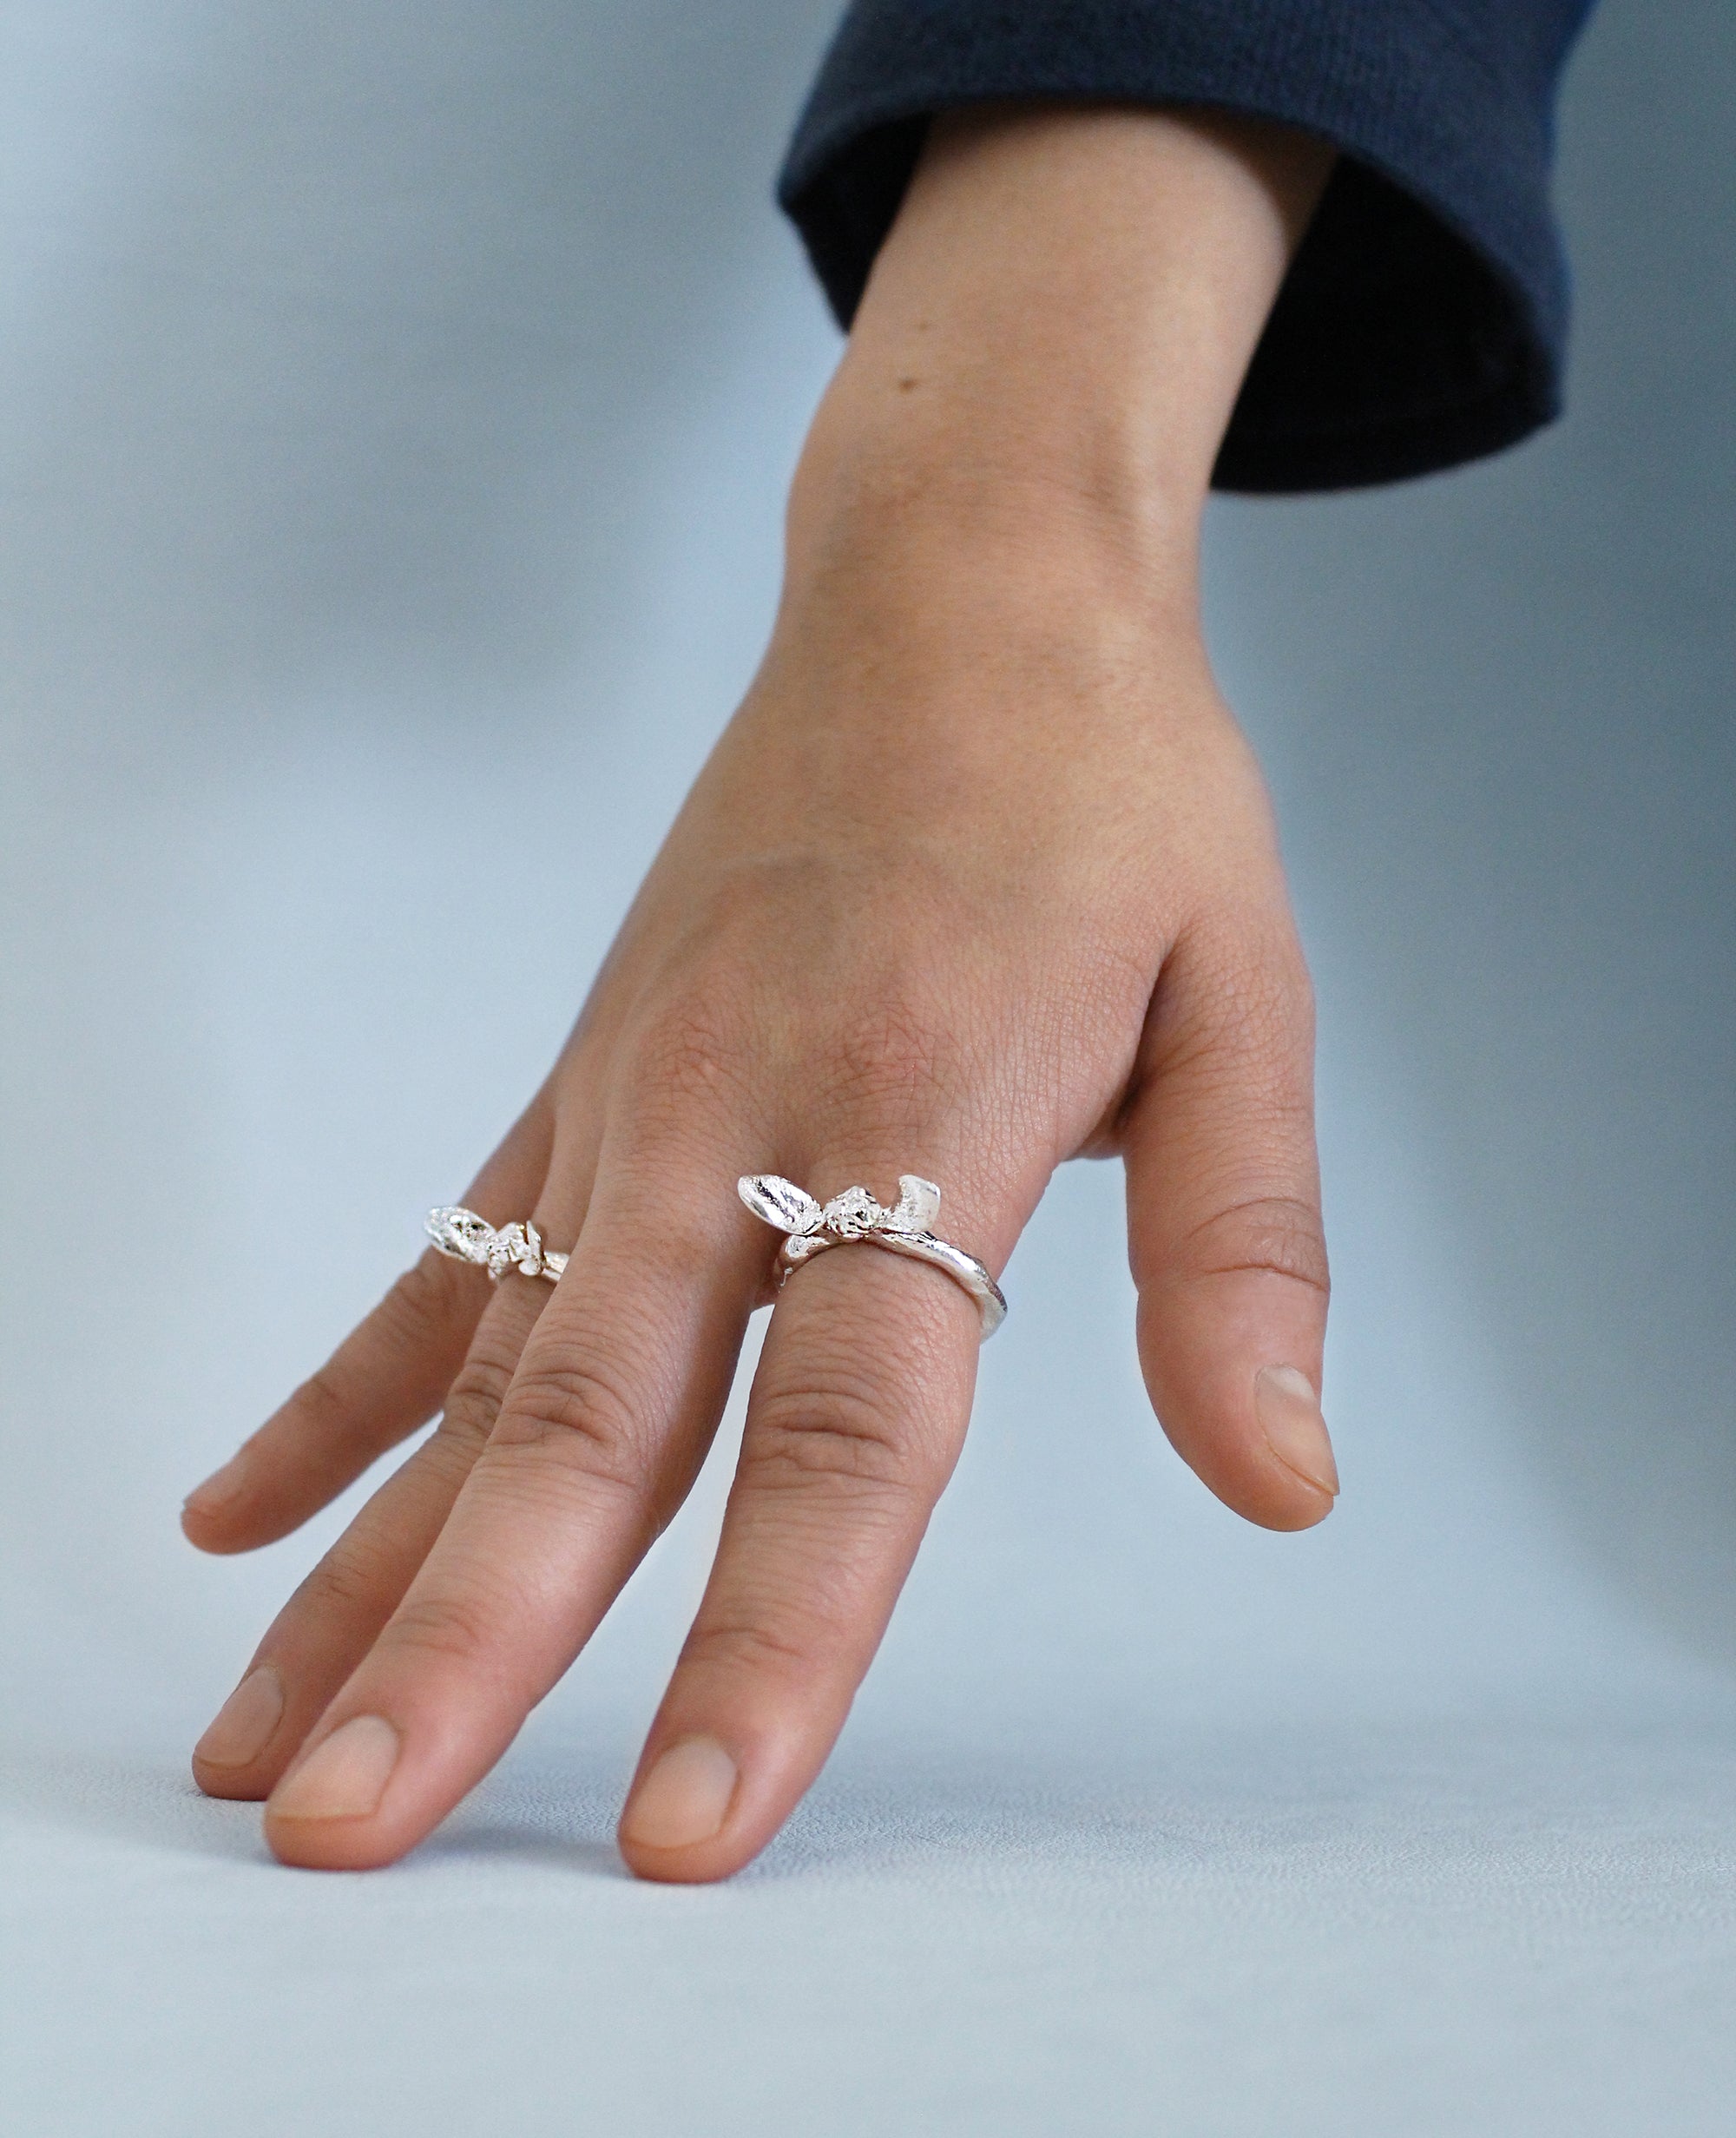 BOW WEE // silver ring - ORA-C jewelry - handmade jewelry by Montreal based independent designer Caroline Pham